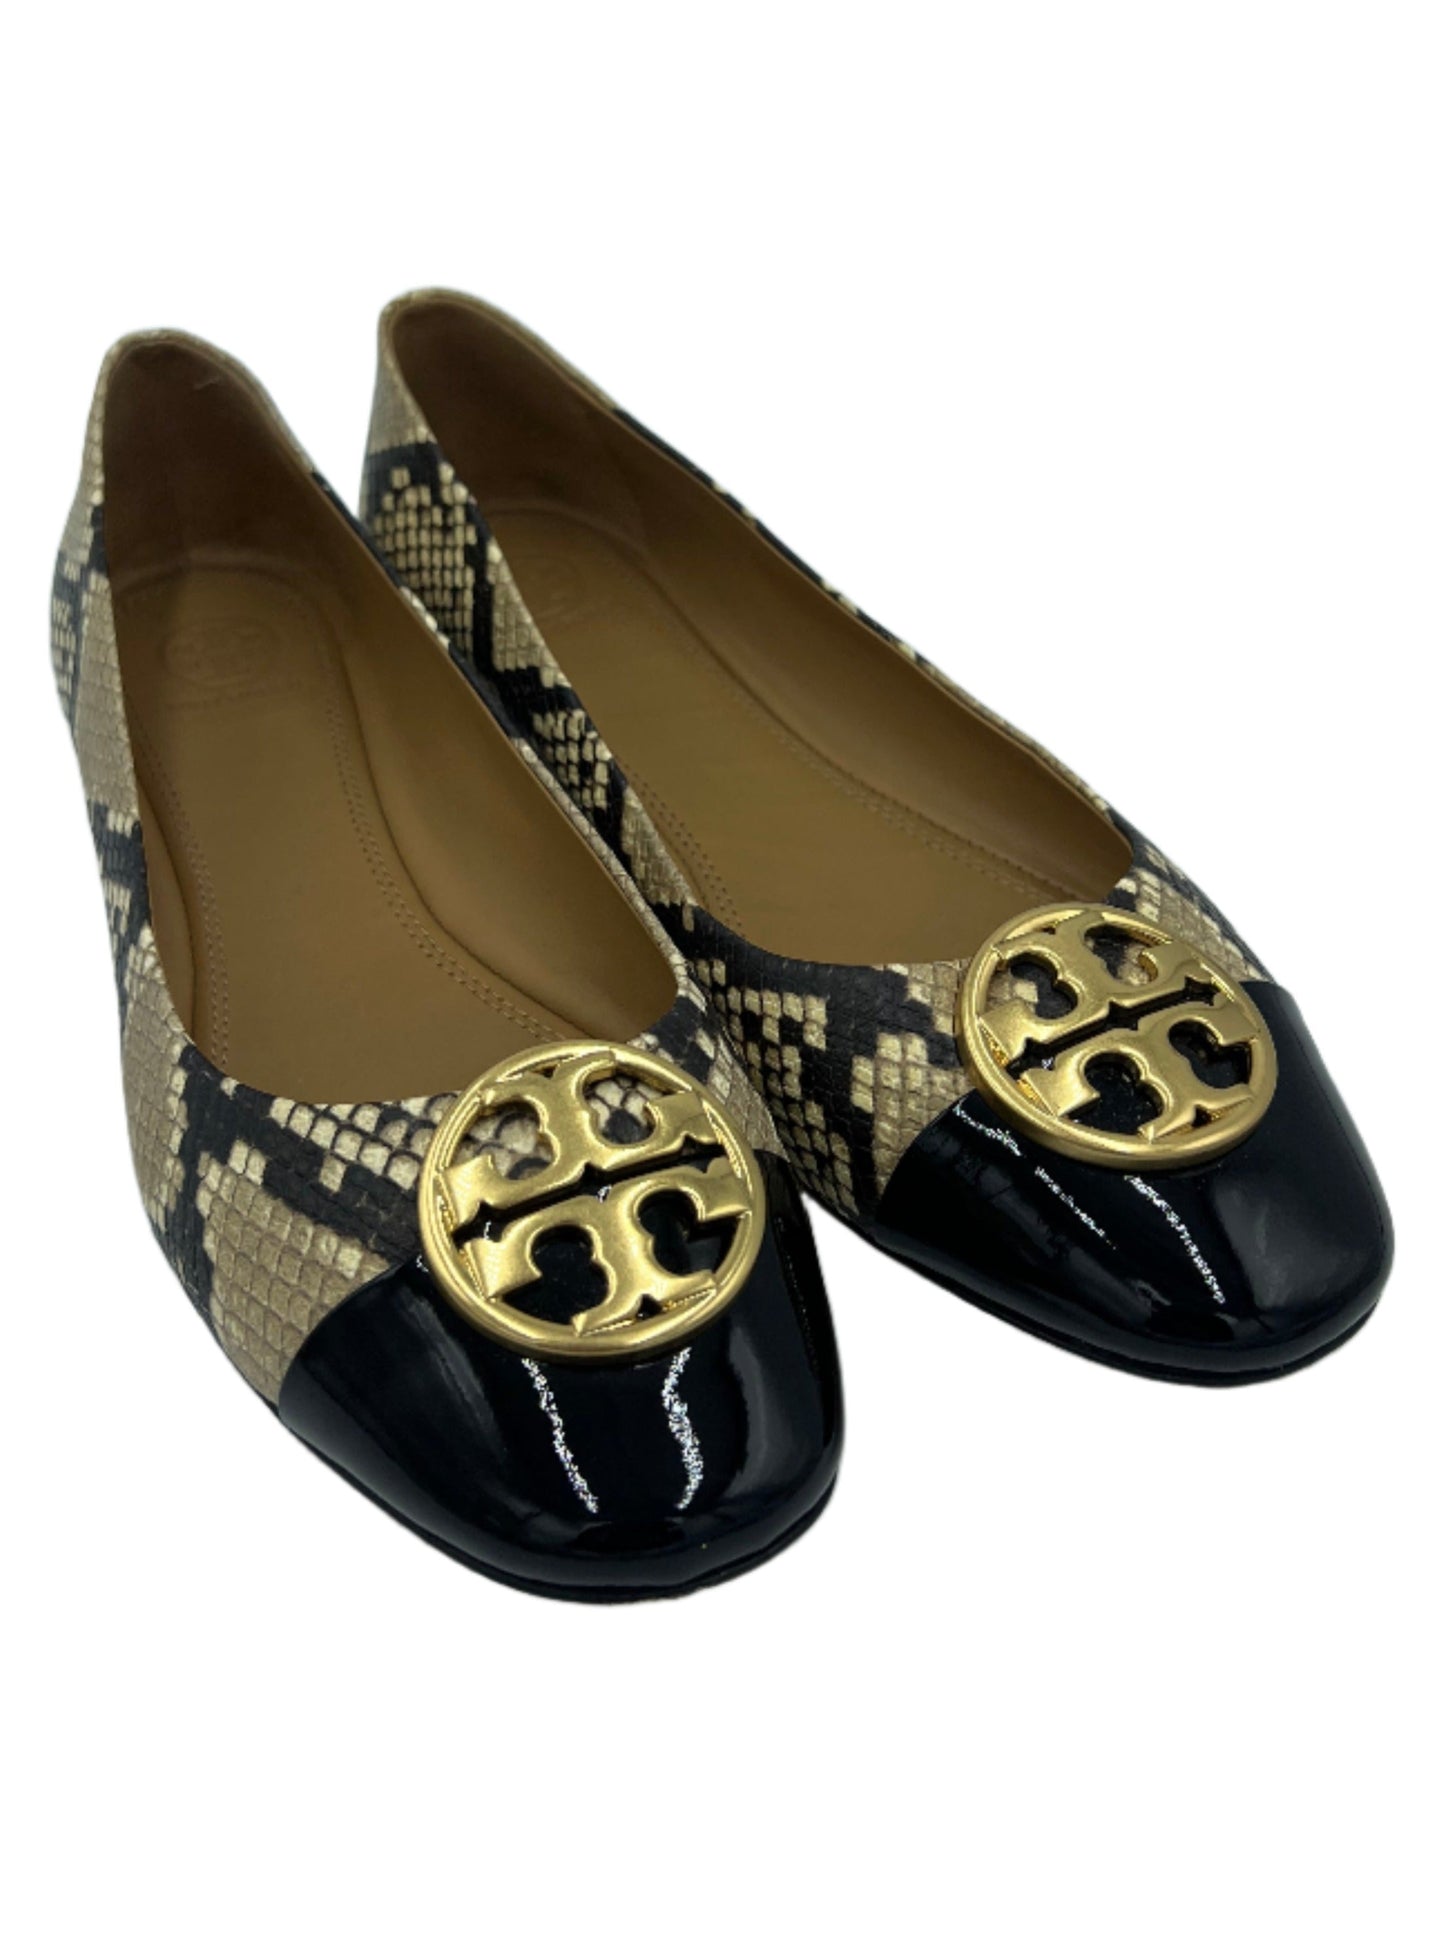 Tory Burch Snakeskin Print Shoes  Size 10